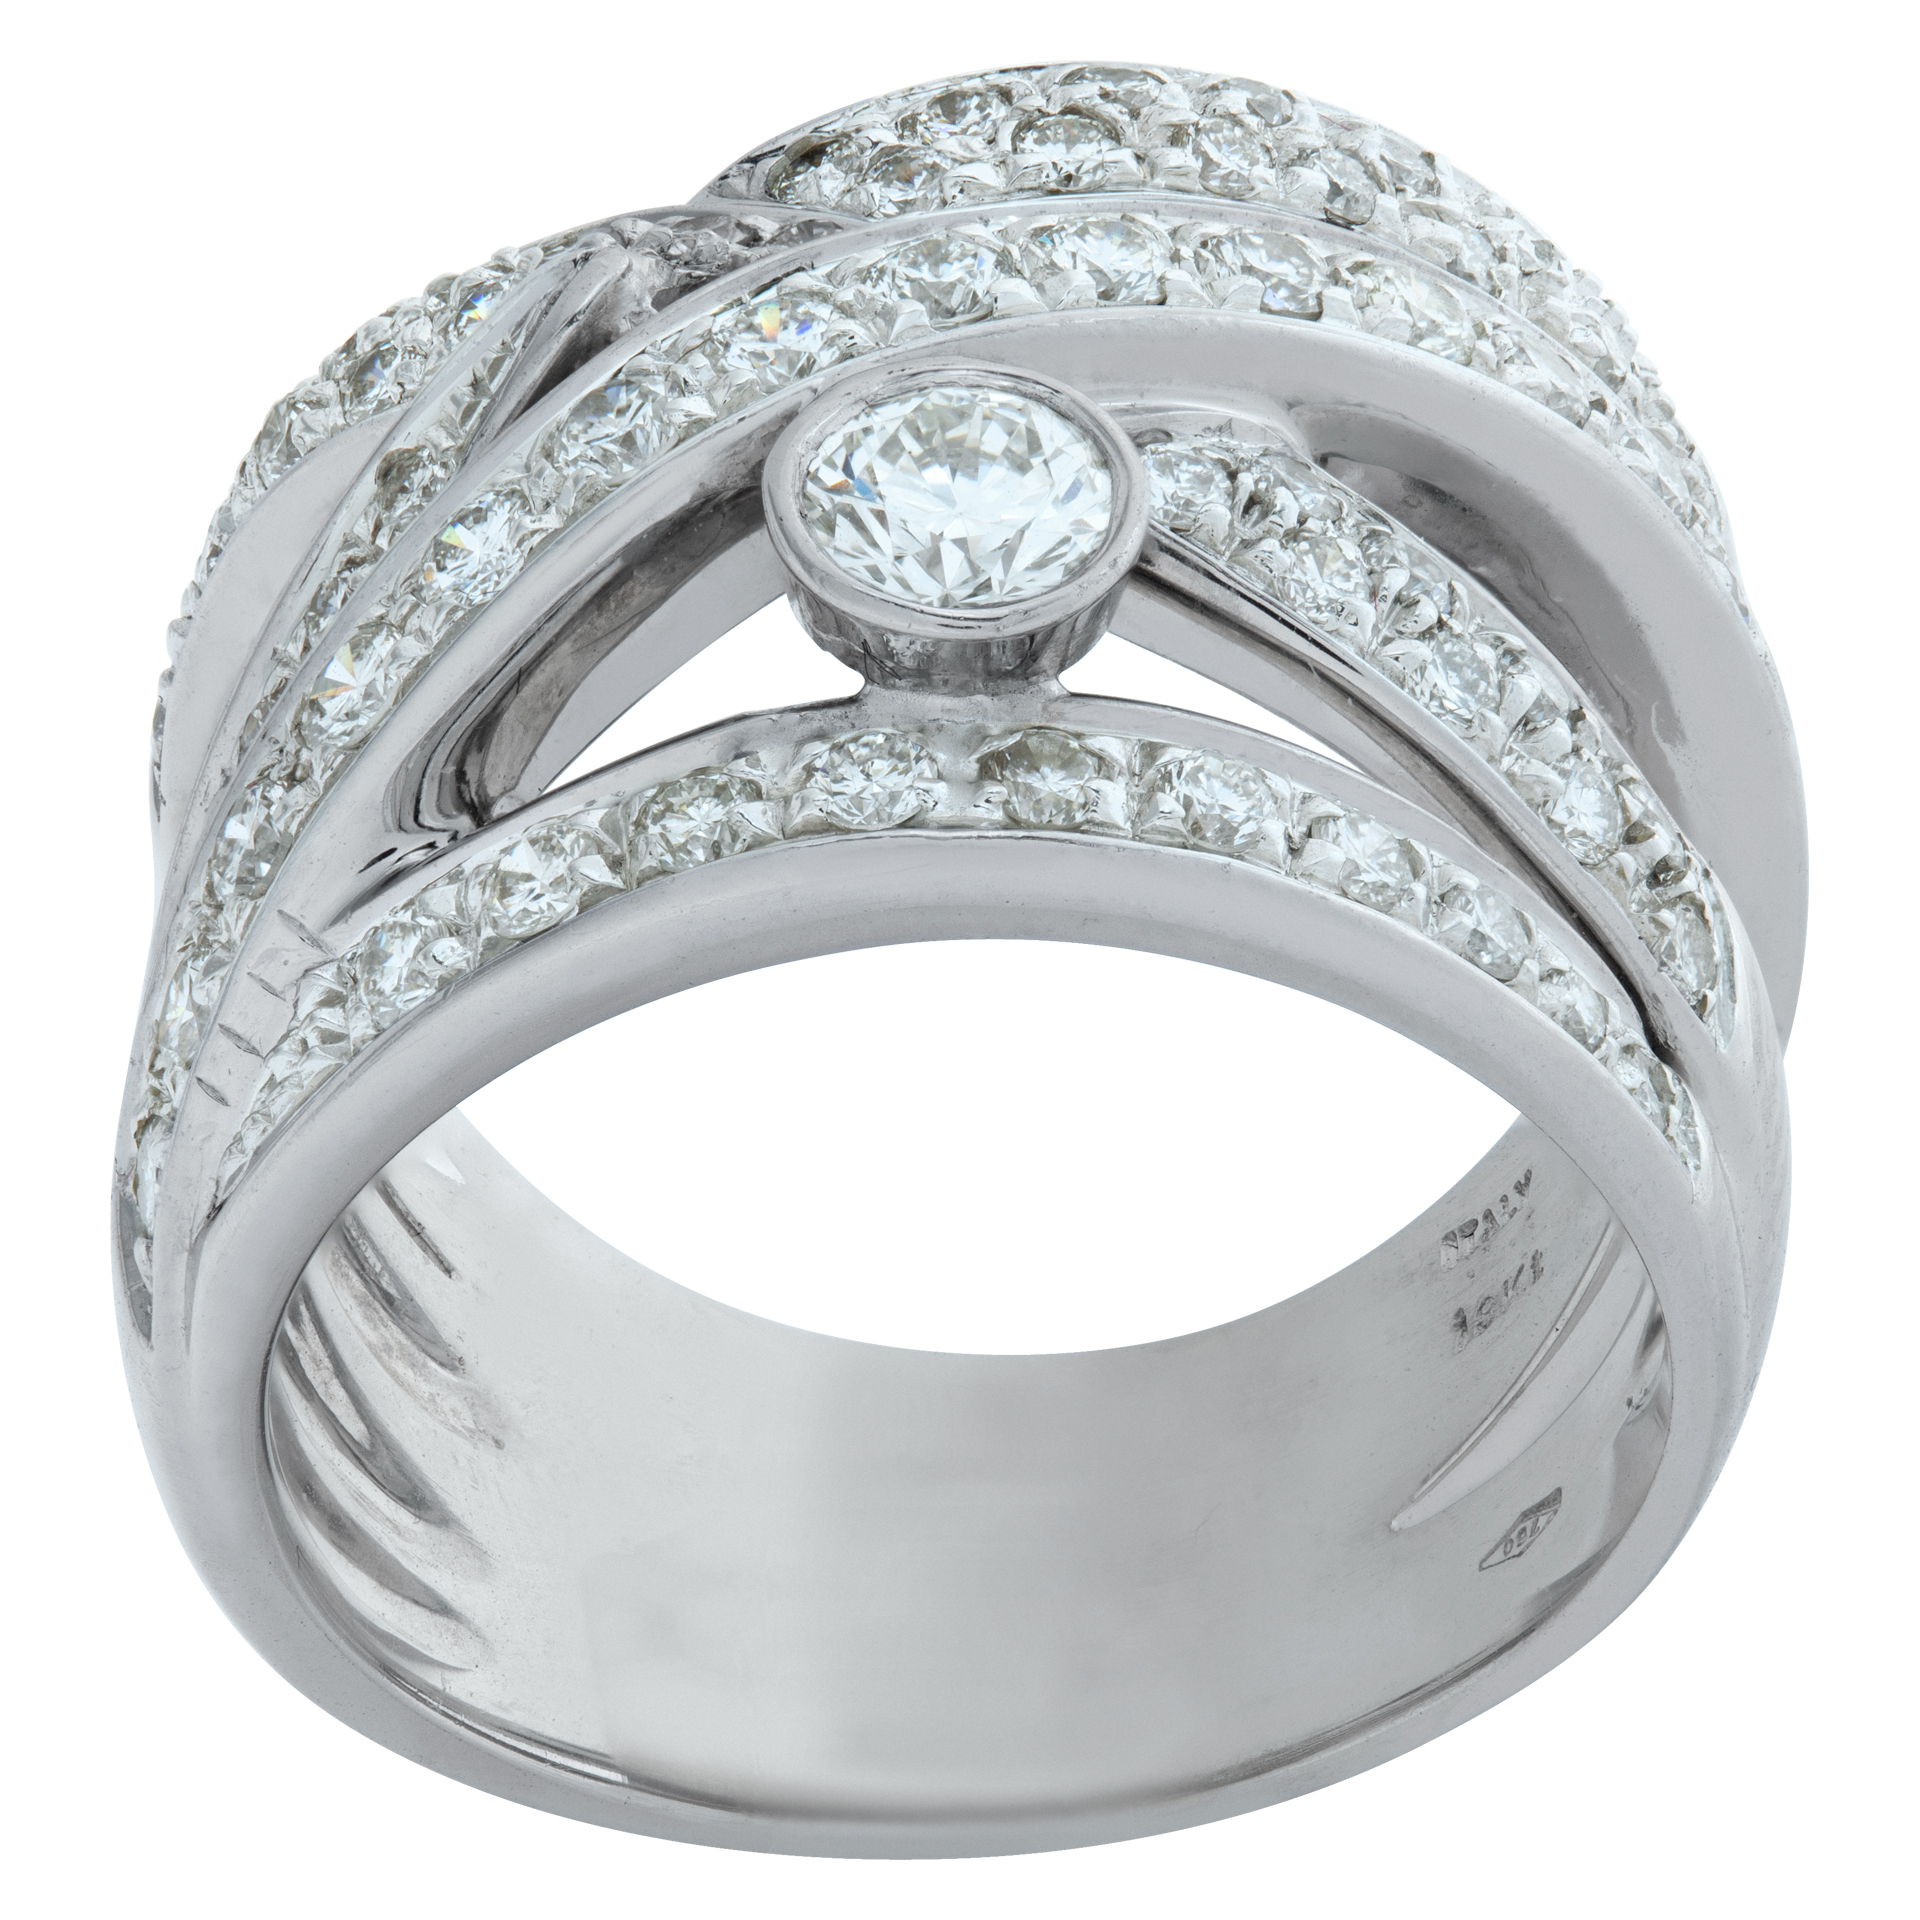 Wide criss-cross diamond ring in 18k white gold with approx 1.75 carats in round brilliant cut diamonds